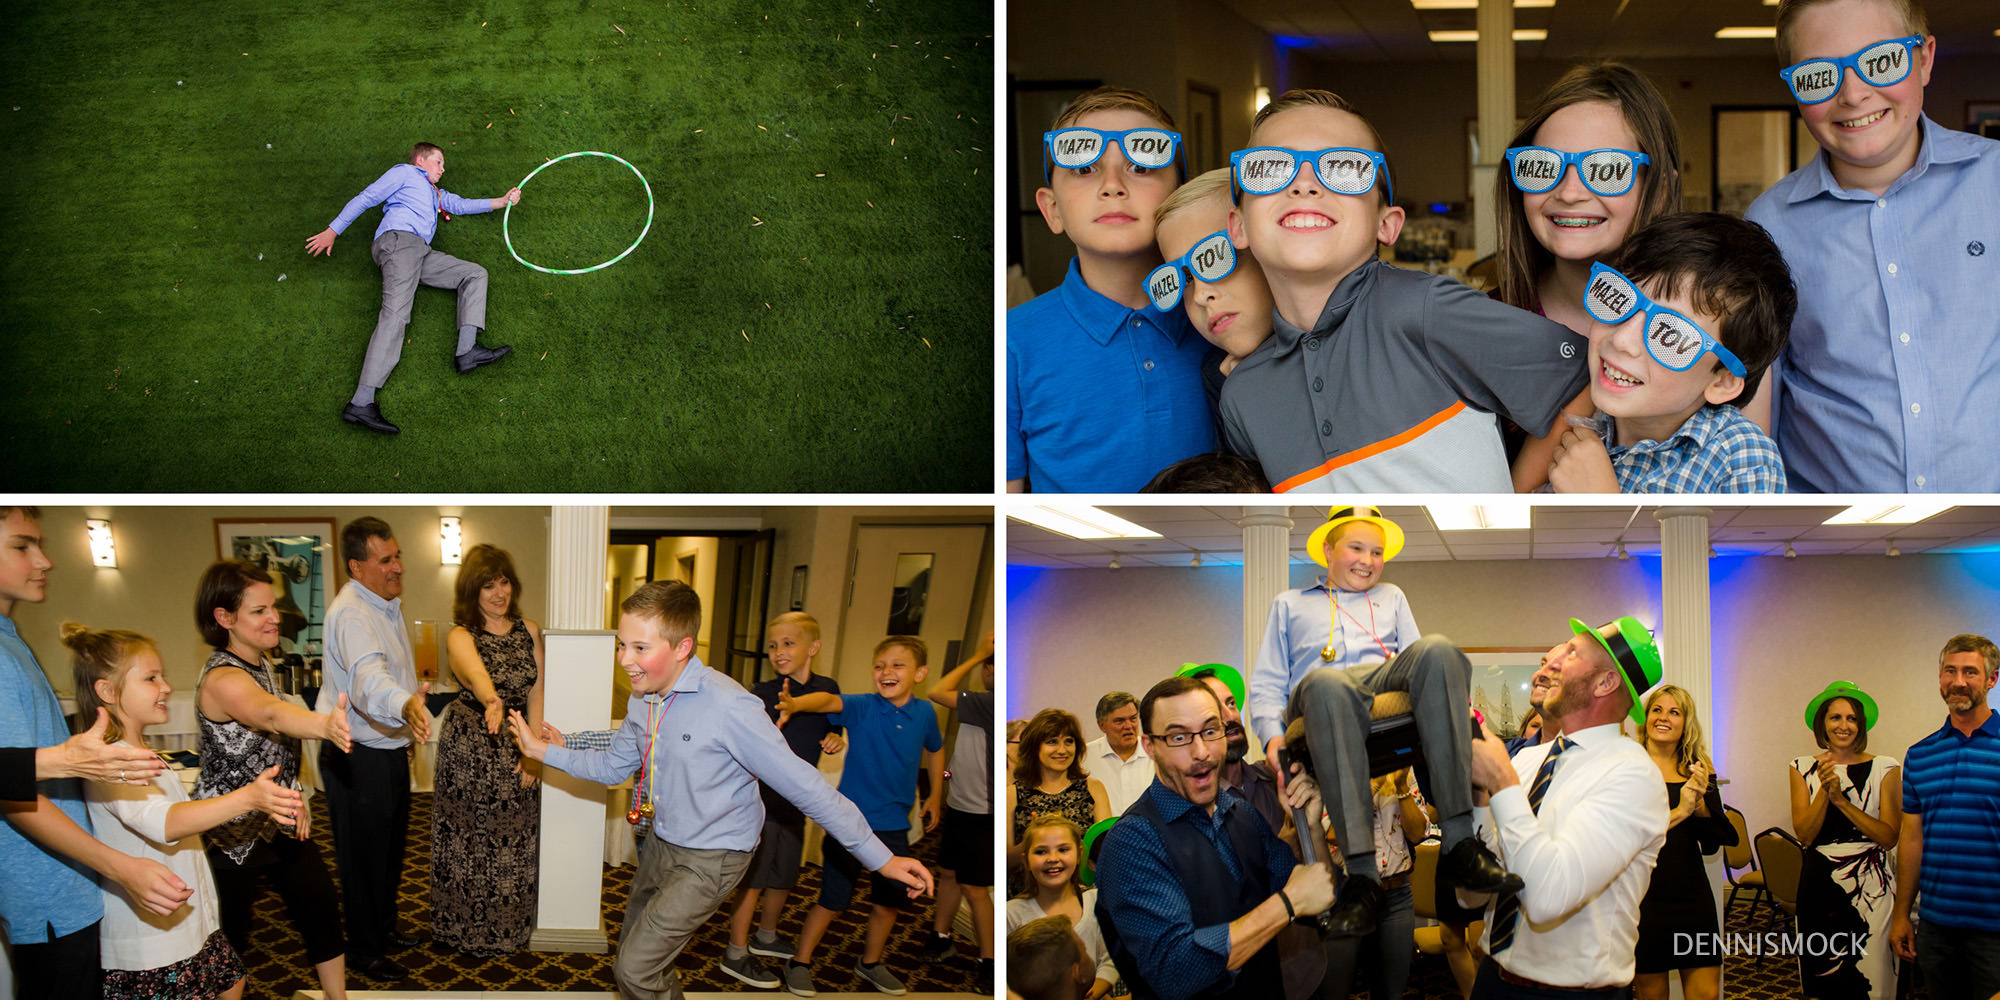 San Diego Bar Mitzvah party pictures  with kids dancing and family celebrating this special milestone. Photo by Dennis Mock 